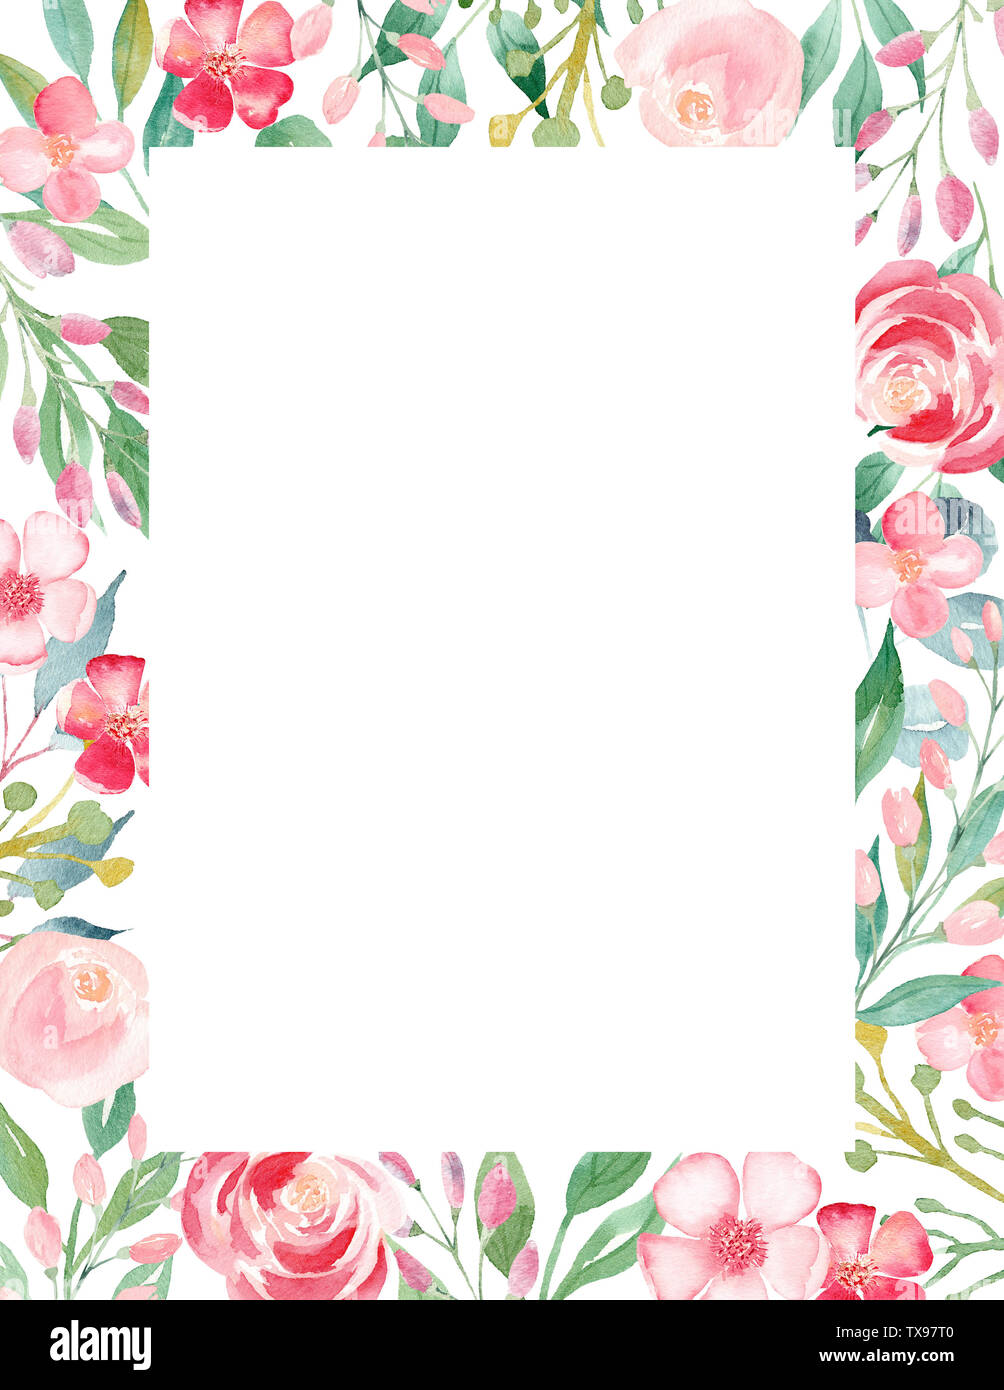 Flowers watercolor hand drawn raster frame template. Blooming floral ...